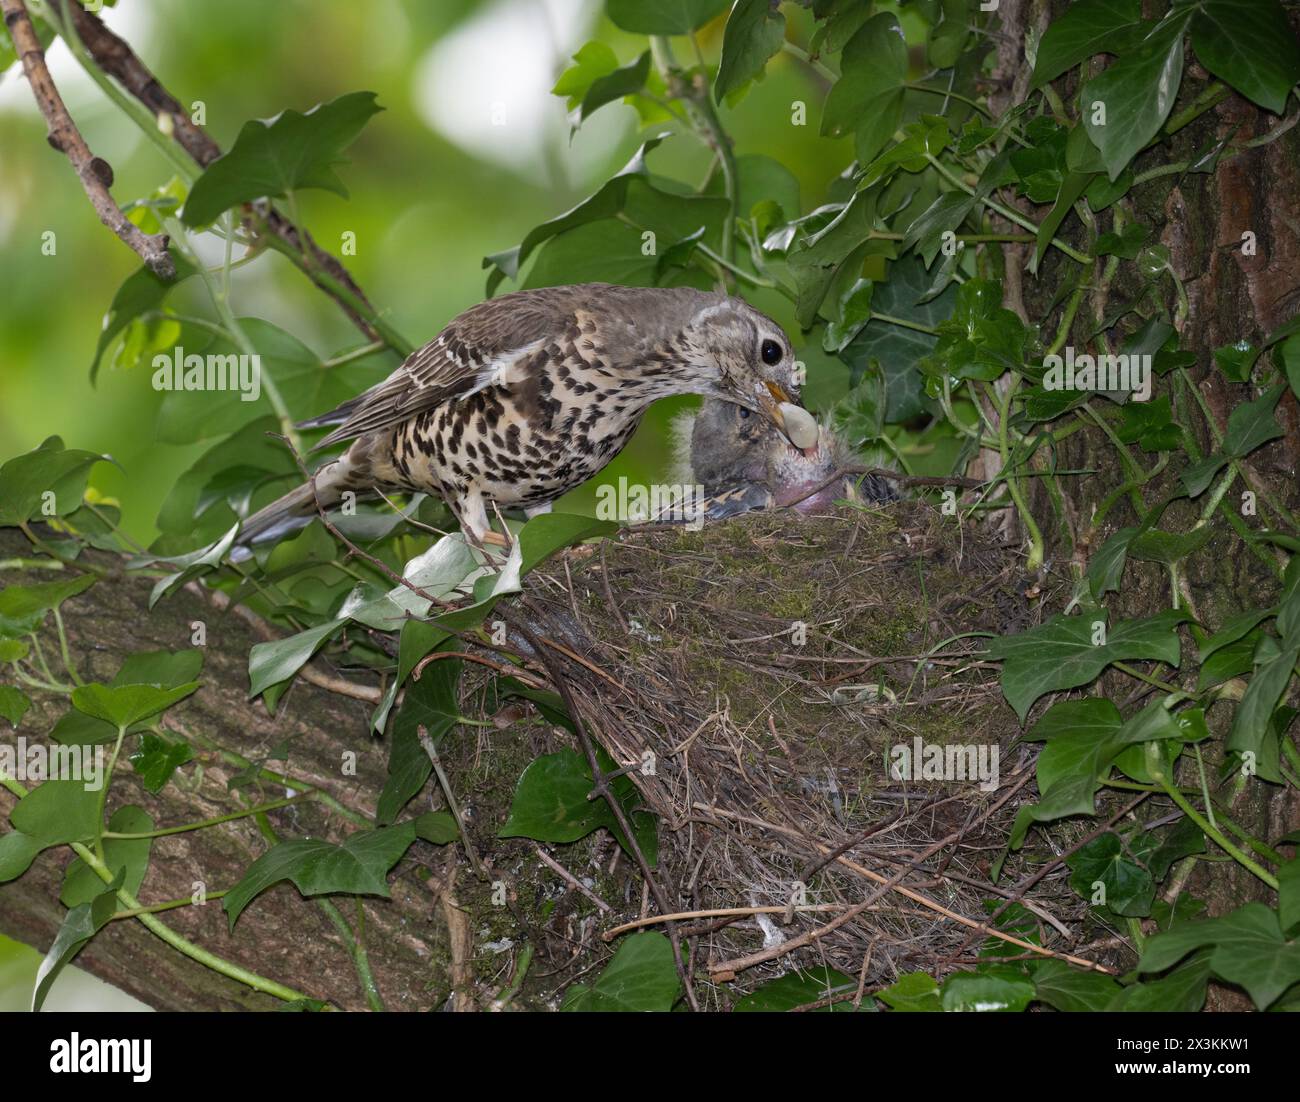 Adult Mistle Thrush, Turdus viscivorus, perched near nest and removing a faecal sac from chick, Queen's Park, London, United Kingdom Stock Photo